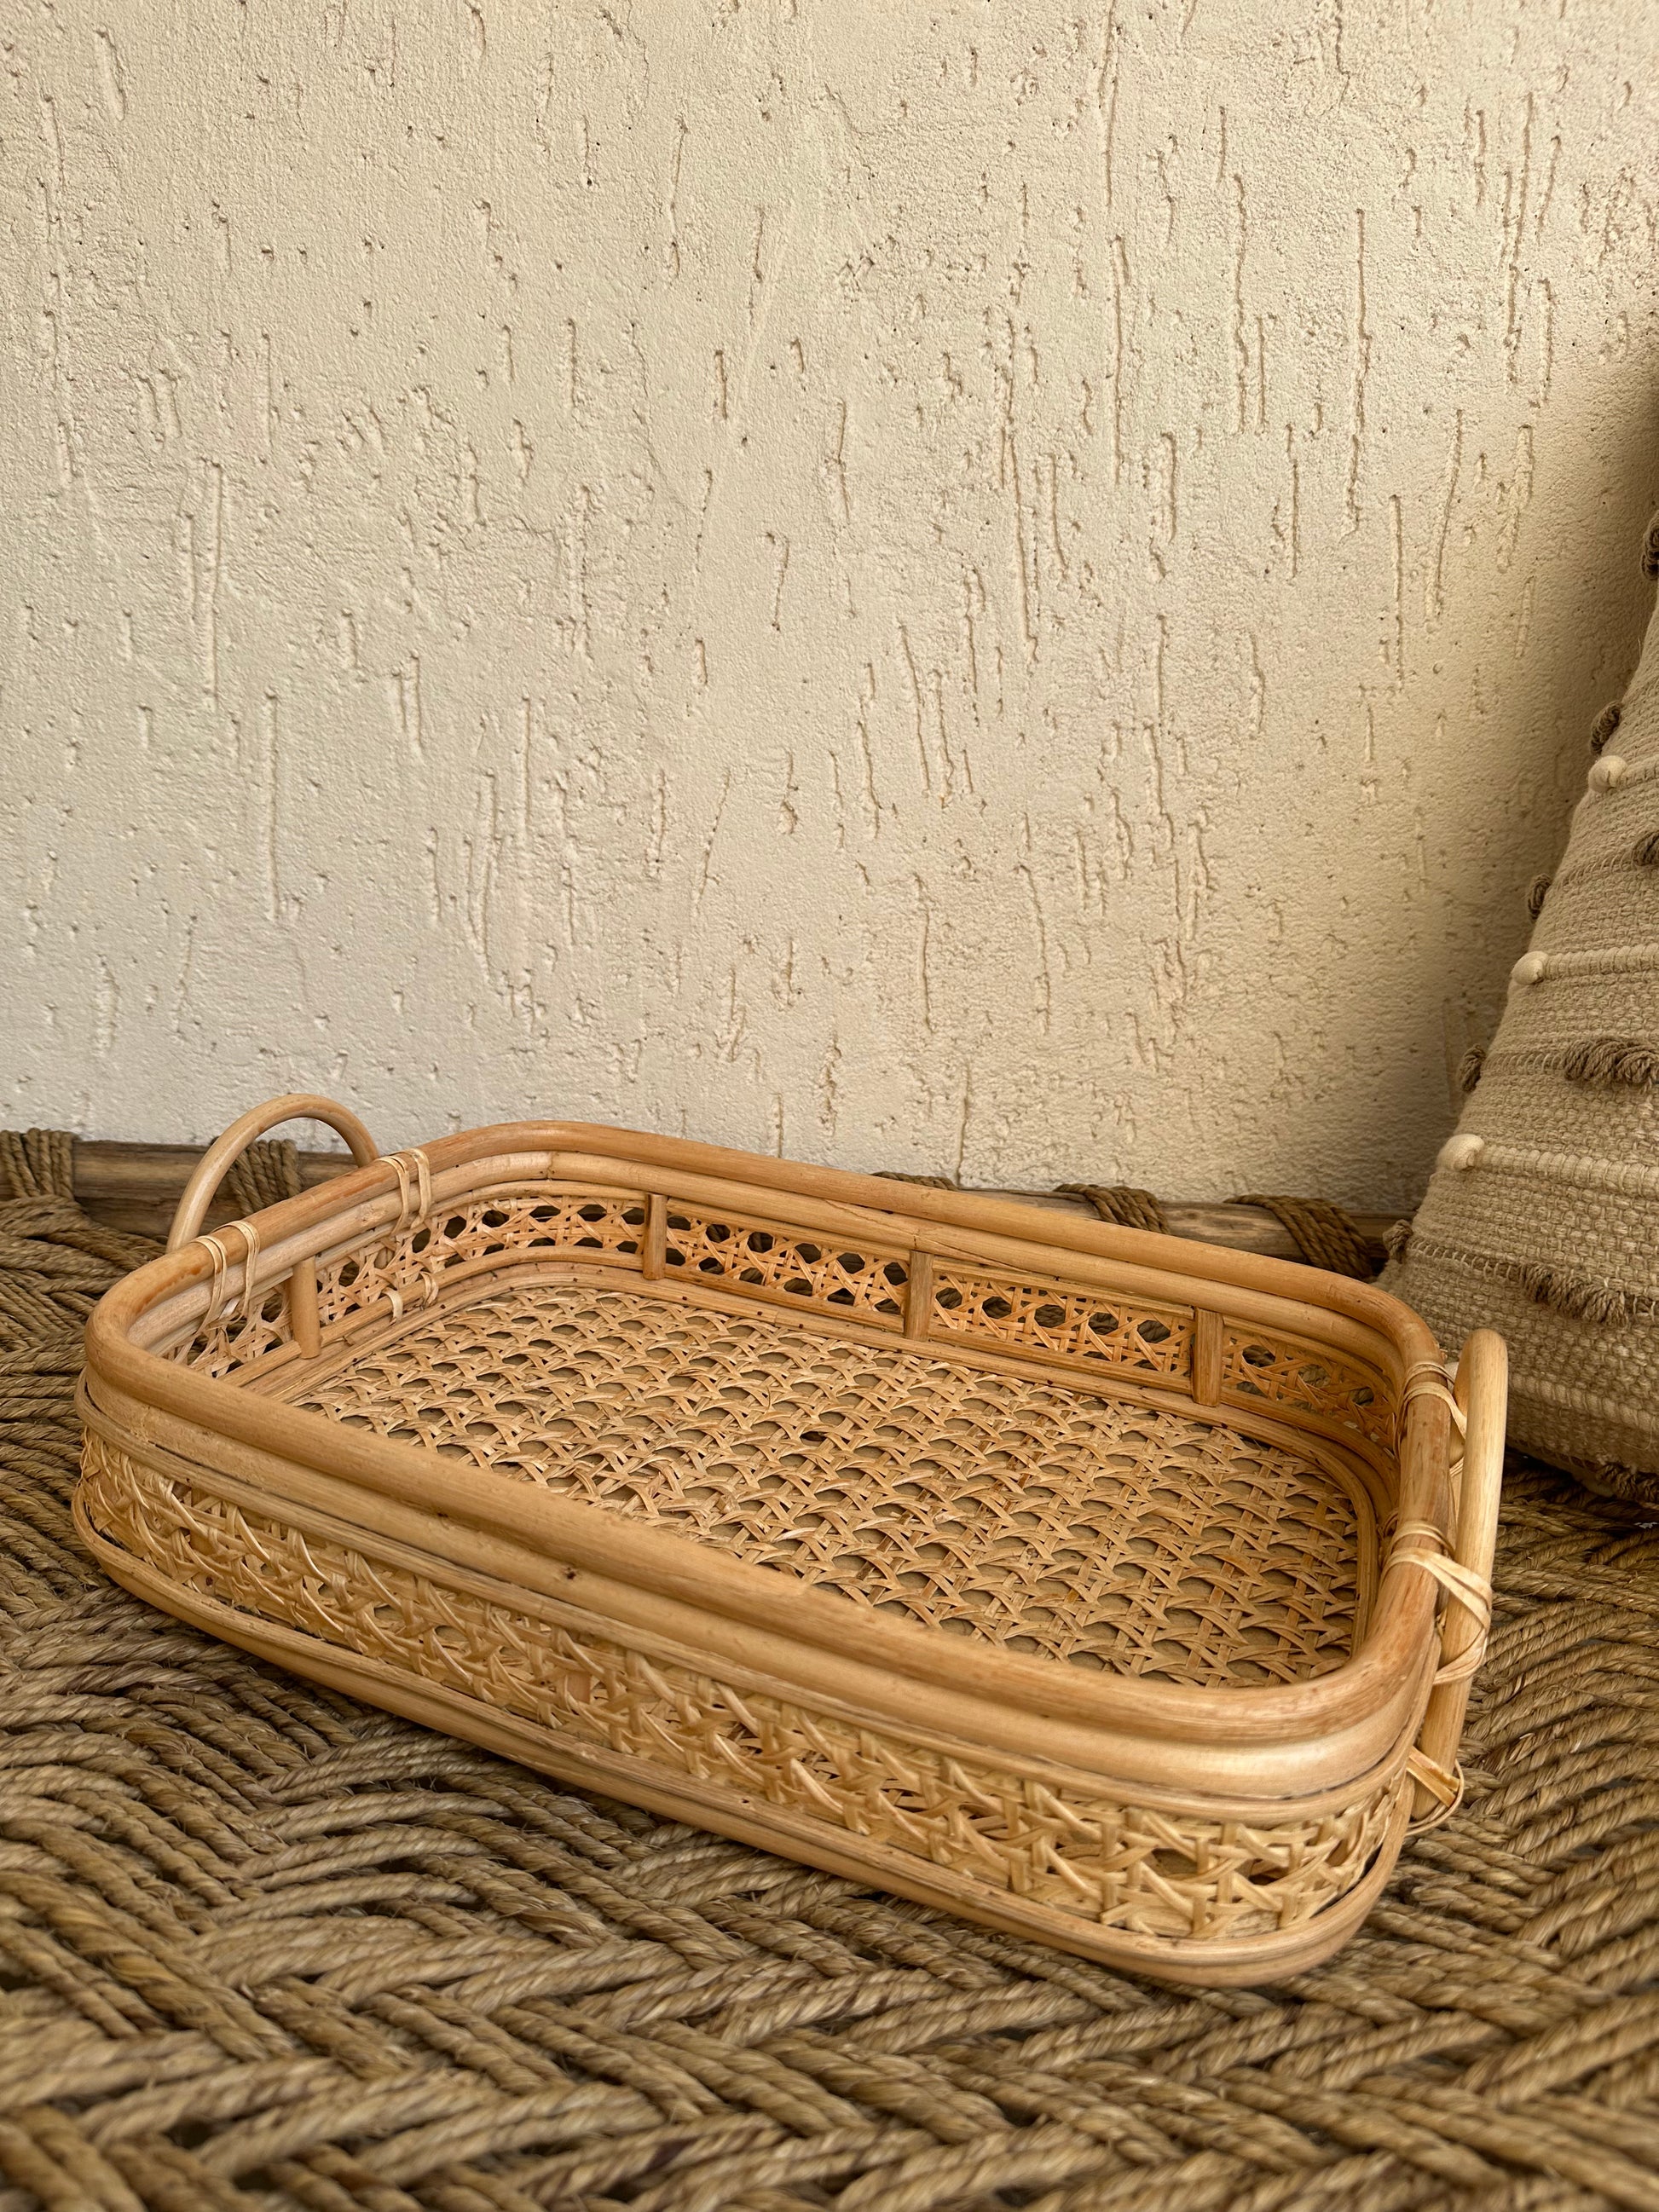 This lovely rattan tray is a must have to create stylish spaces. In effortlessly chic hand-woven cane with detailed wicker pattern makes it an eye catcher. This multipurpose tray look gorgeous on a coffee table with plants and candles , storage for blankets in living room or place them in bathroom with rolled up towels to merge functionality with stylish charm. TESU